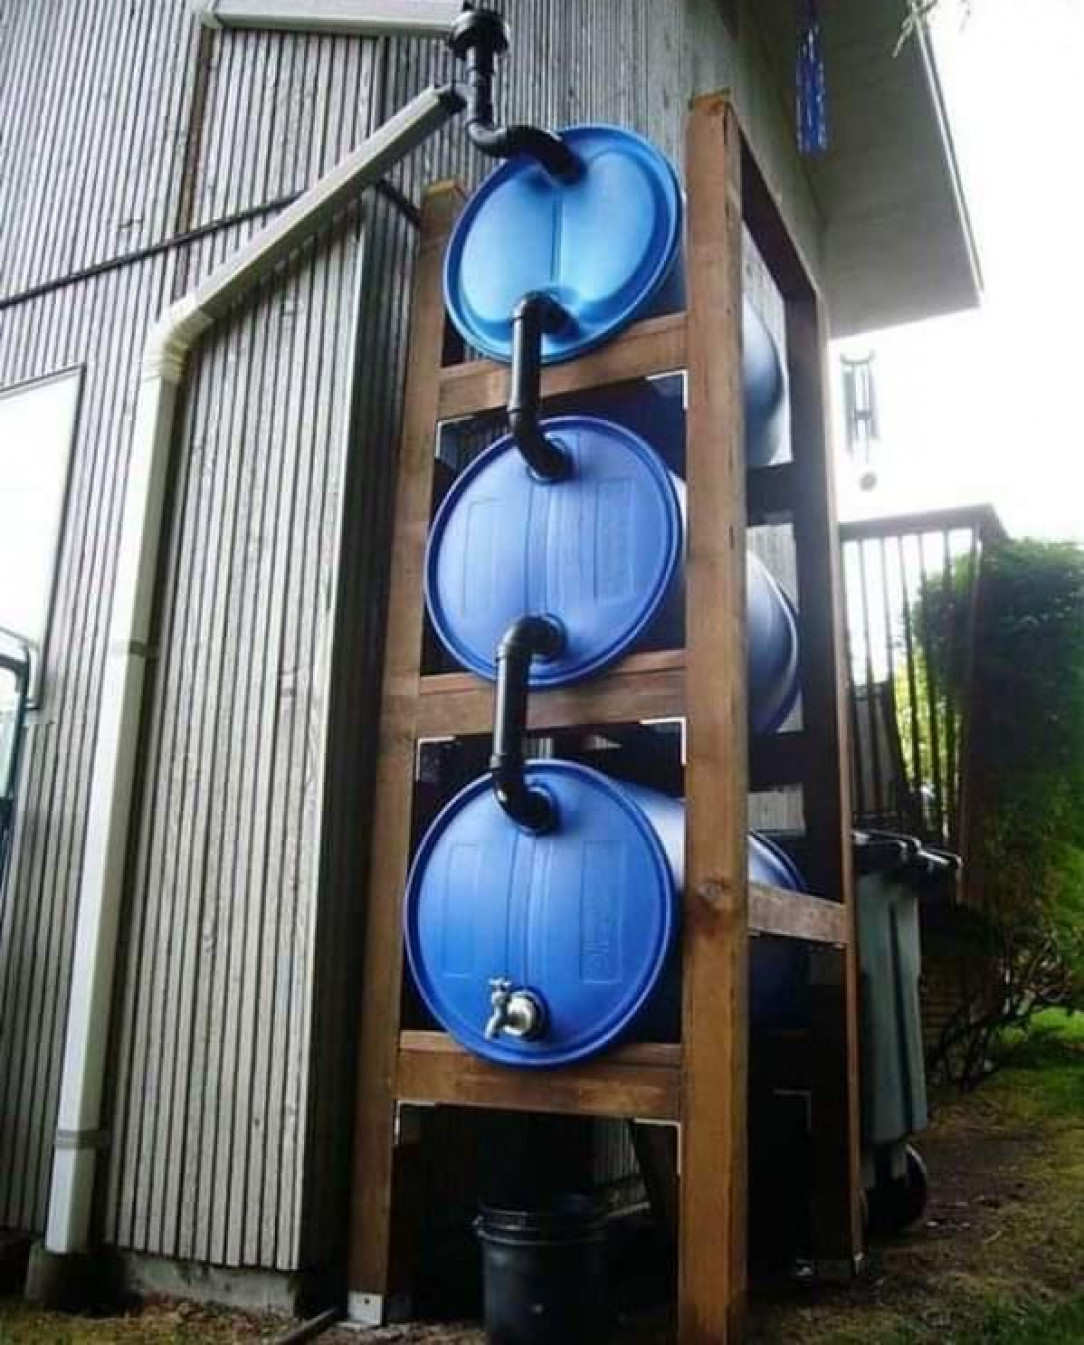 how to link up multiple barrels for rainwater collection